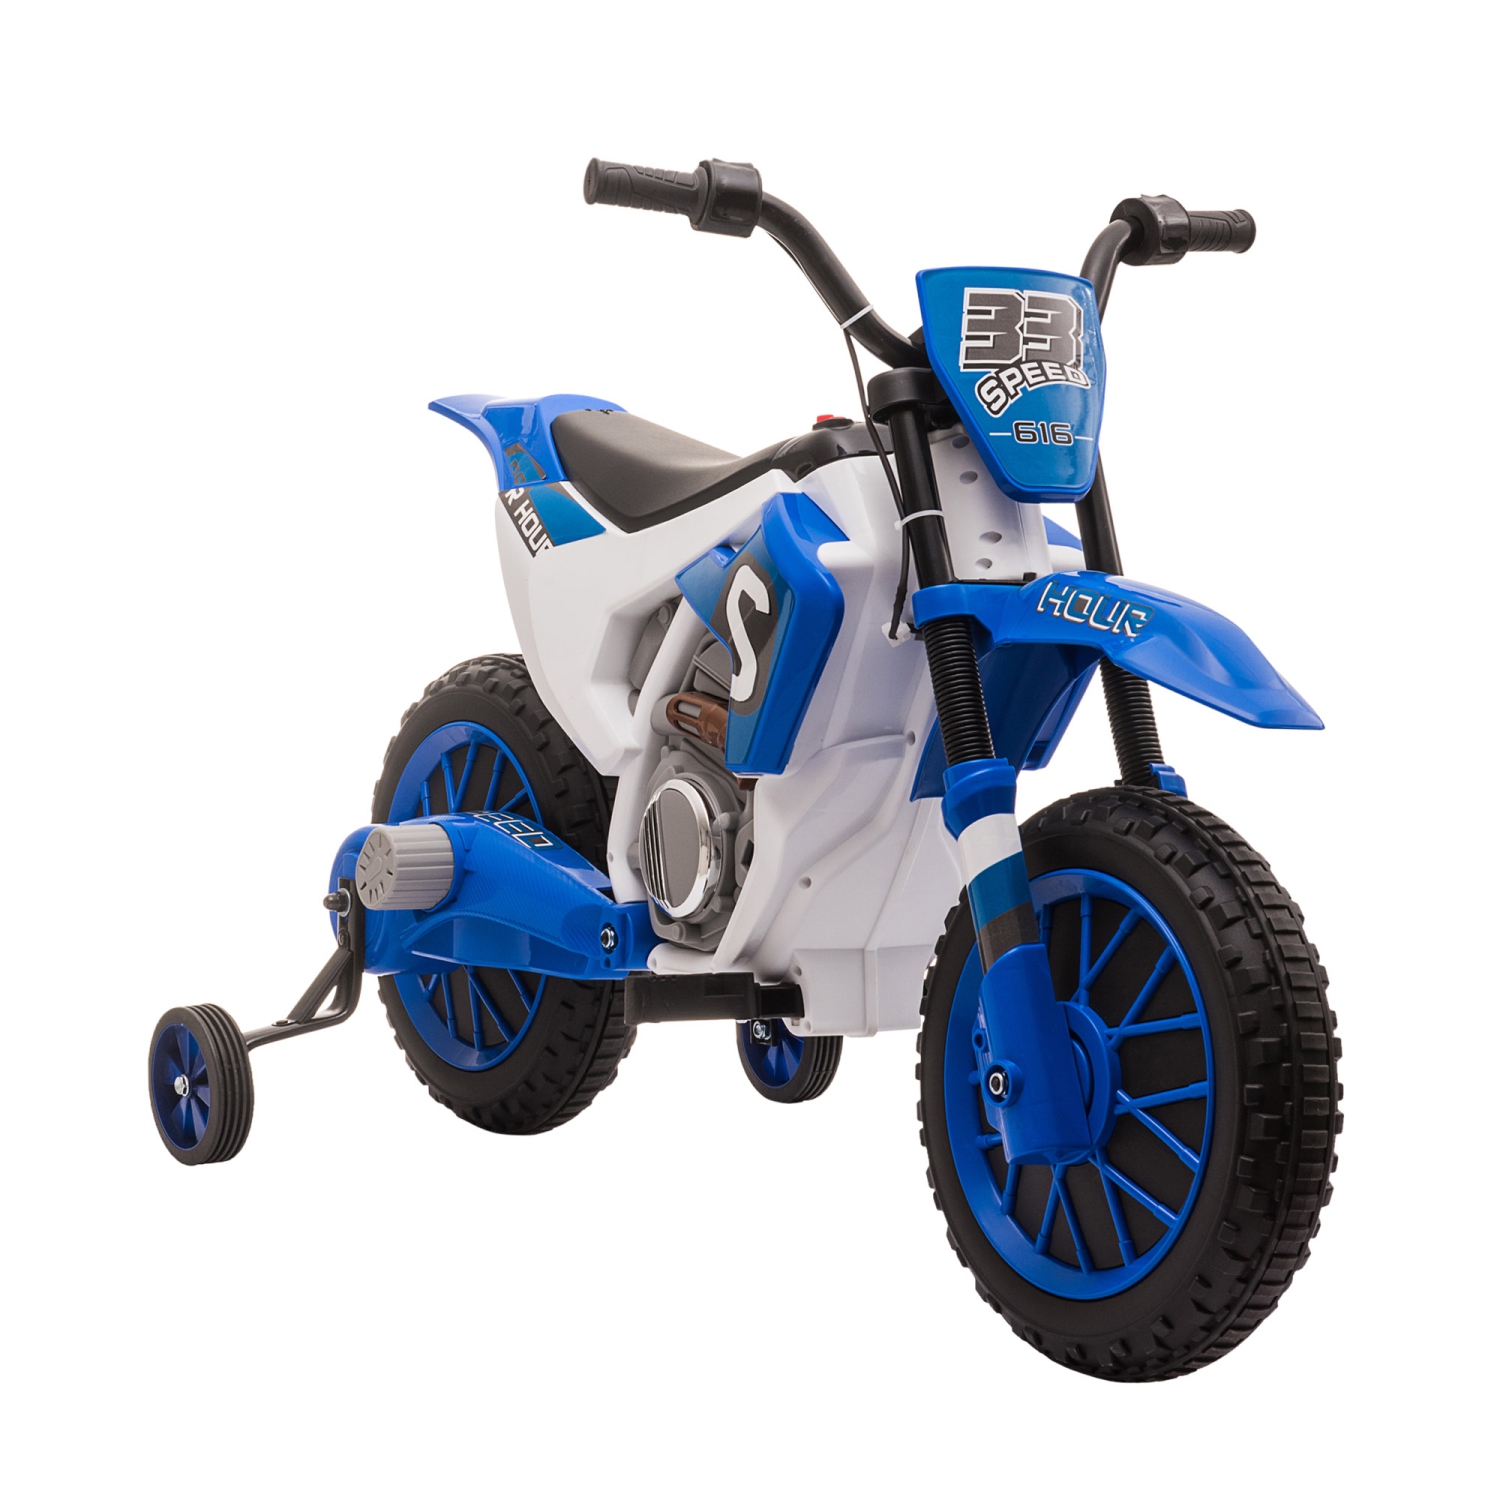 Aosom Kids Dirt Bike Battery-Powered Ride-On Electric Motorcycle with Charging 12V Battery, Training Wheels Blue